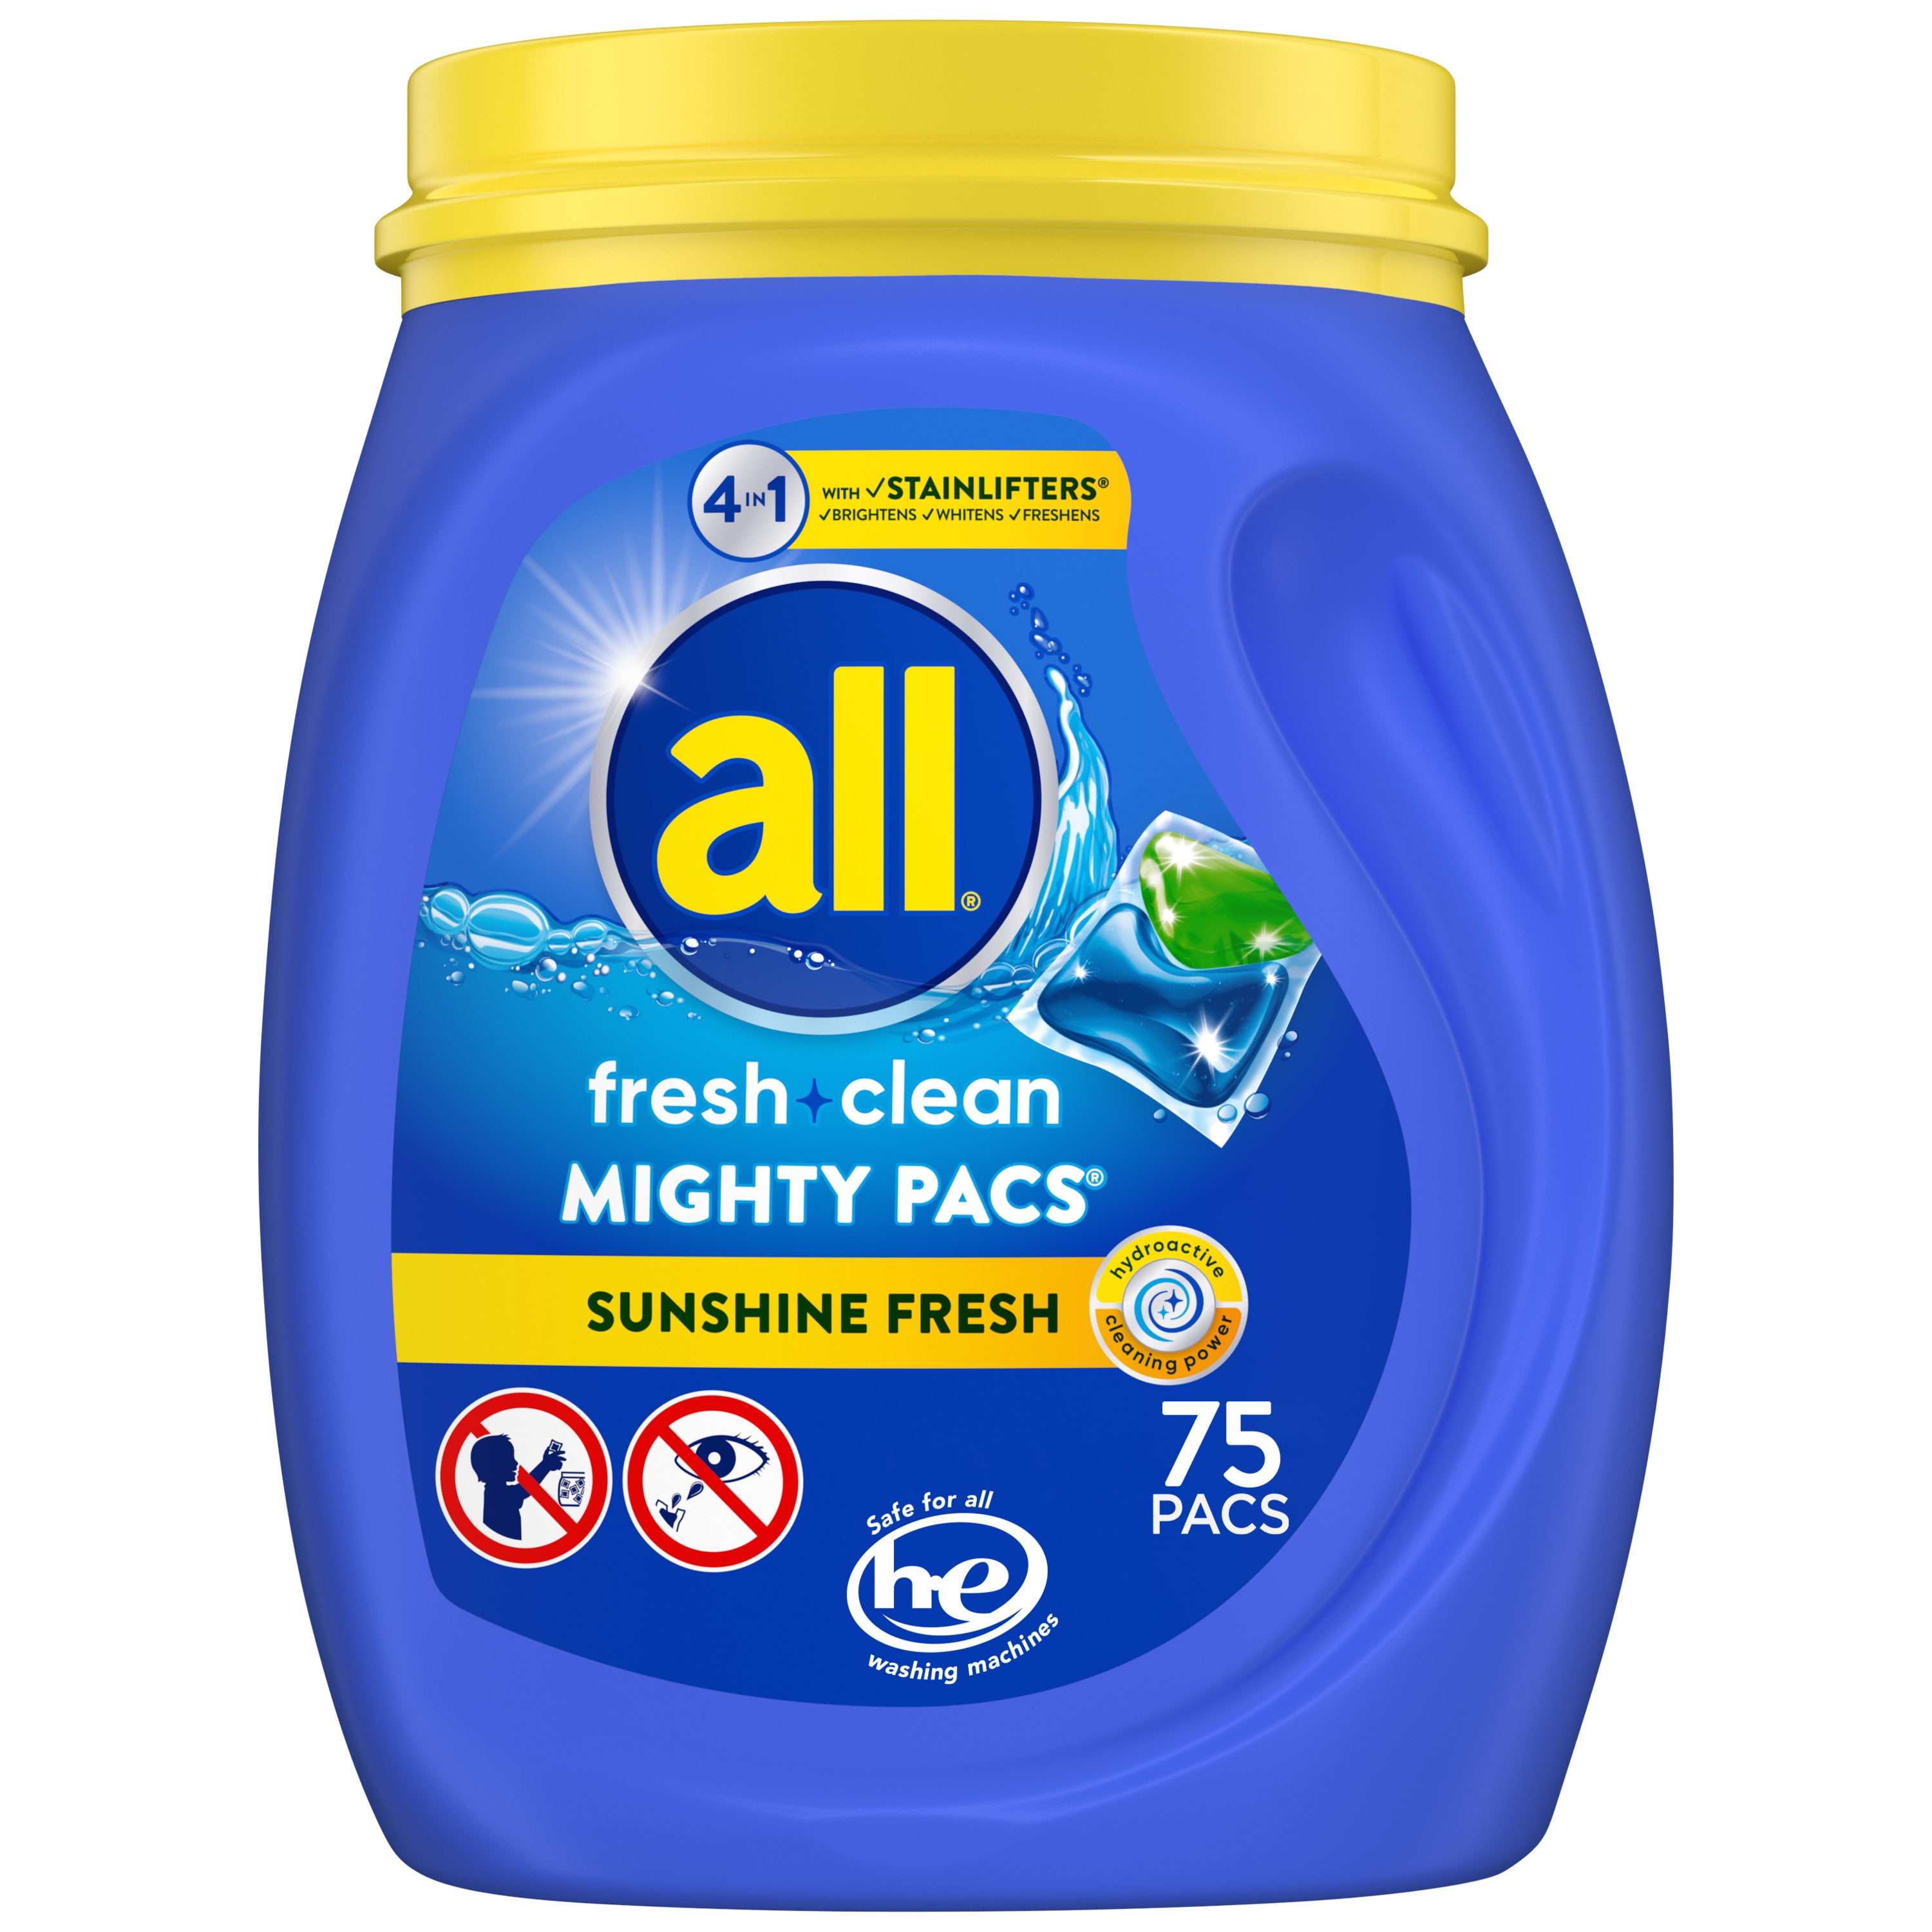 Ariel Original All-in-1 PODS® Washing Tablets